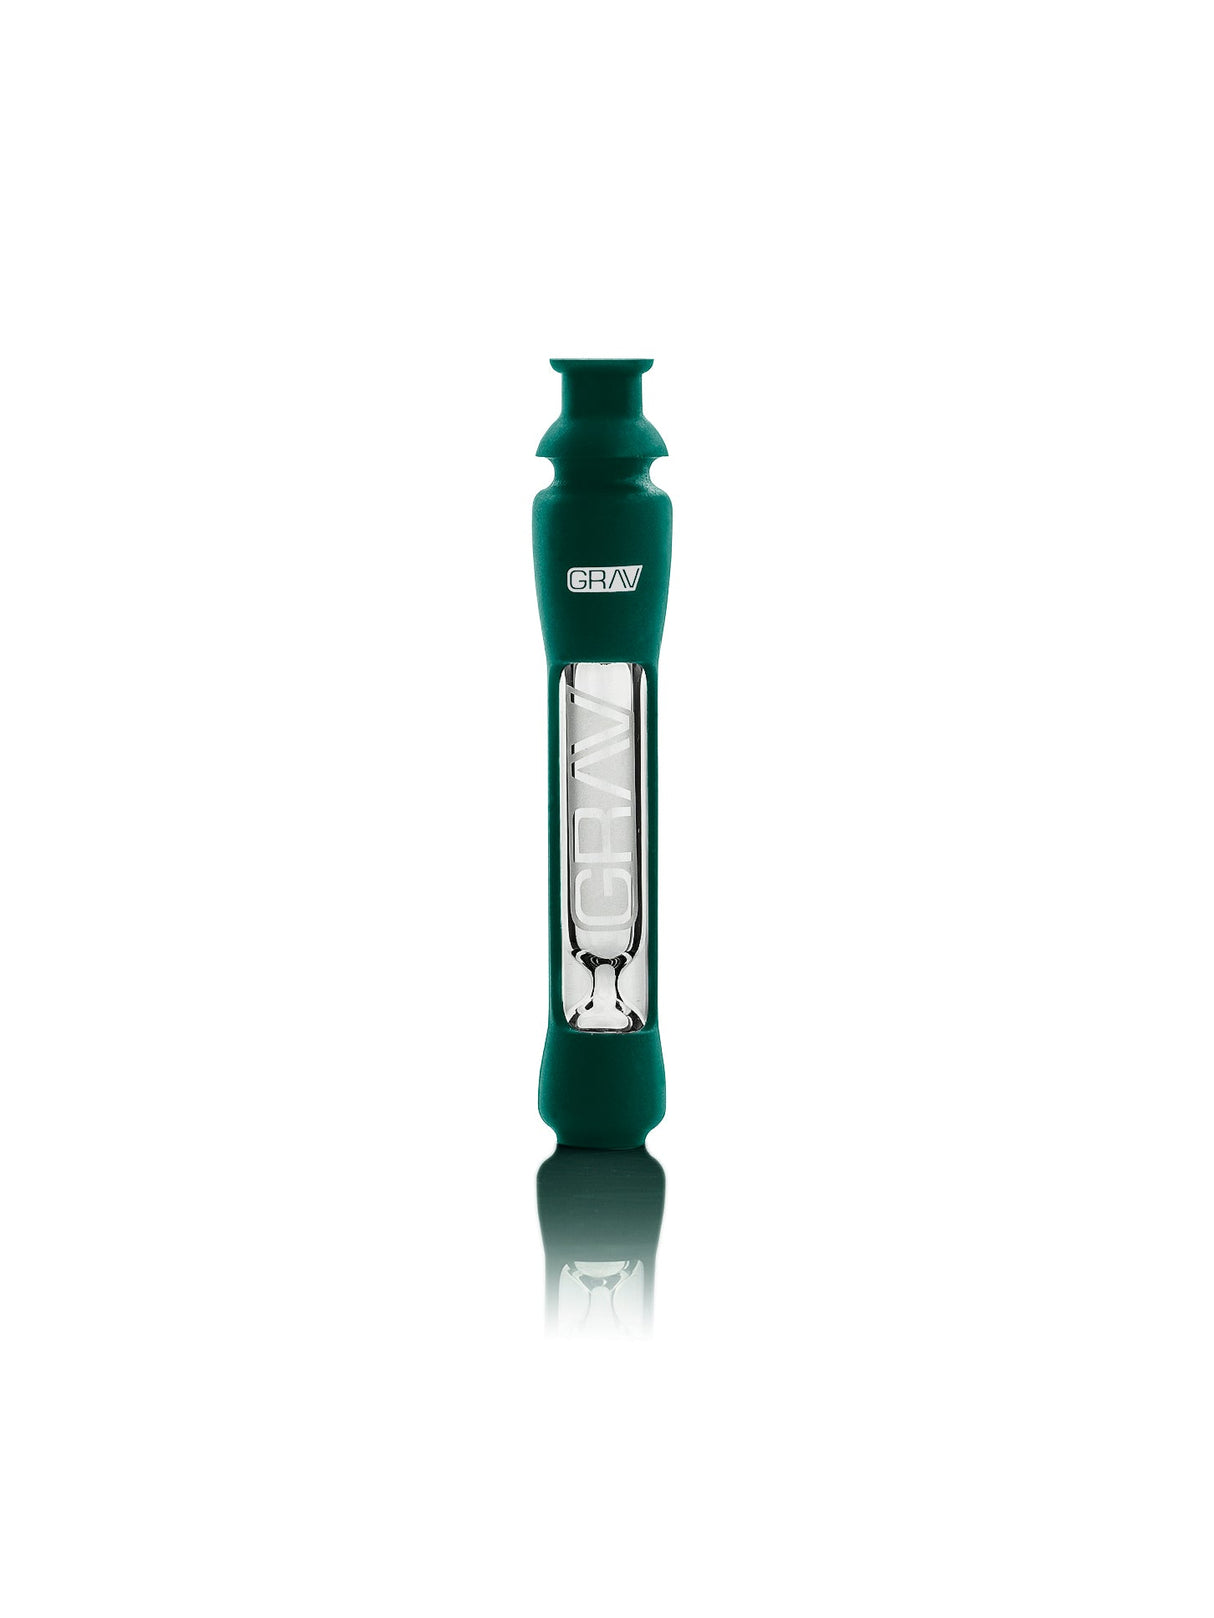 GRAV 12mm Taster with Silicone Skin in Dark Teal, front view on white background, portable design for dry herbs